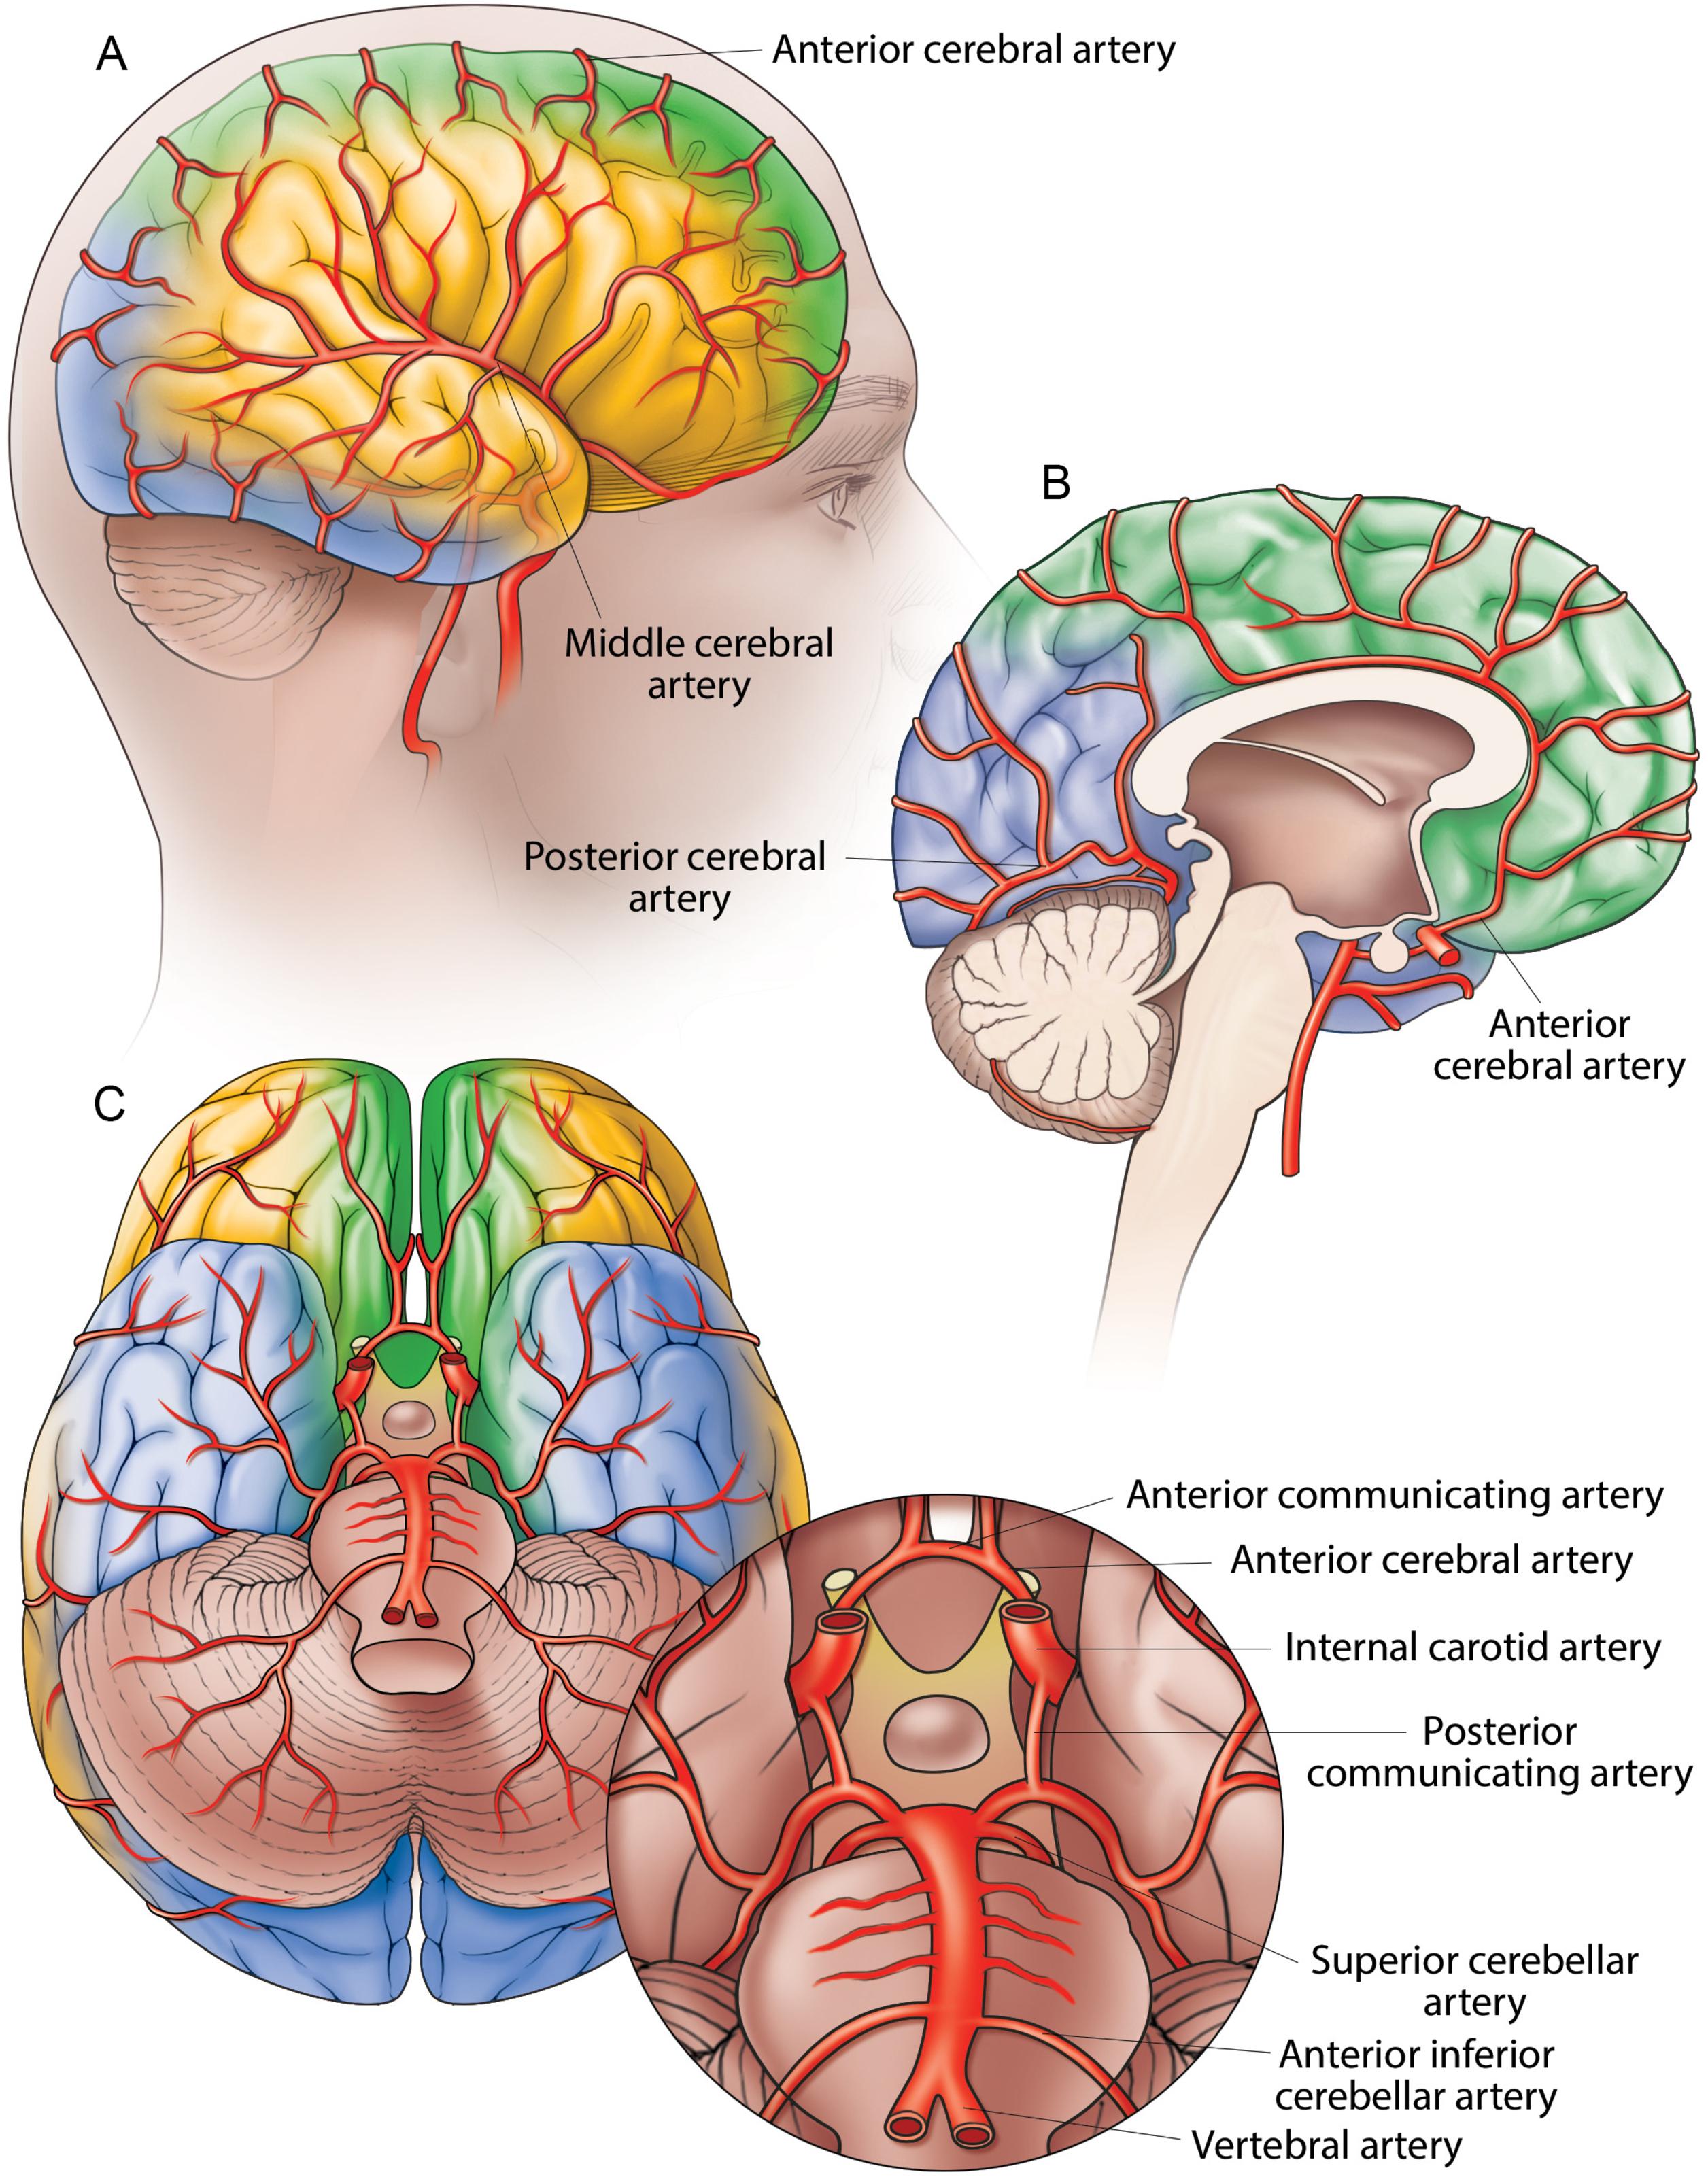 Fig. 1.3, Vascularization of the brain. The shading indicates the arterial supply territories of the anterior ( green ), middle ( yellow ), and posterior ( blue ) cerebral arteries. ( A ) Lateral view. The middle cerebral artery supplies most of the lateral surface of the cerebral hemisphere, excluding the superior portion of the parietal lobe, which is supplied by the anterior cerebral artery, and the occipital and inferior portions of the temporal lobe, which are supplied by the posterior cerebral artery. ( B ) Midline sagittal view. Branches of the anterior cerebral artery, the frontal arteries, supply the paracentral lobule, medial frontal and cingulate gyri, and the corpus callosum. The posterior cerebral artery supplies the posteromedial surface of the temporal lobe and the occipital lobe. The visual cortex, responsible for the contralateral field of vision, is also supplied by the posterior cerebral artery. ( C ) Inferior view. The posterior cerebral artery also supplies the inferior temporal lobe. Orbital branches of the anterior cerebral artery supply the frontal lobe, olfactory cortex, medial orbital gyrus, and gyrus rectus. The lateral frontobasal artery, a branch of the middle cerebral artery, supplies the lateral part of the inferior surface of the frontal lobe as well as the inferior frontal gyrus. The circle of Willis is formed anteriorly by the left and right anterior cerebral arteries, connected to each other by the anterior communicating artery, and posteriorly by the left and right posterior cerebral arteries. The anterior and posterior circulation are connected by the left and right posterior communicating arteries.